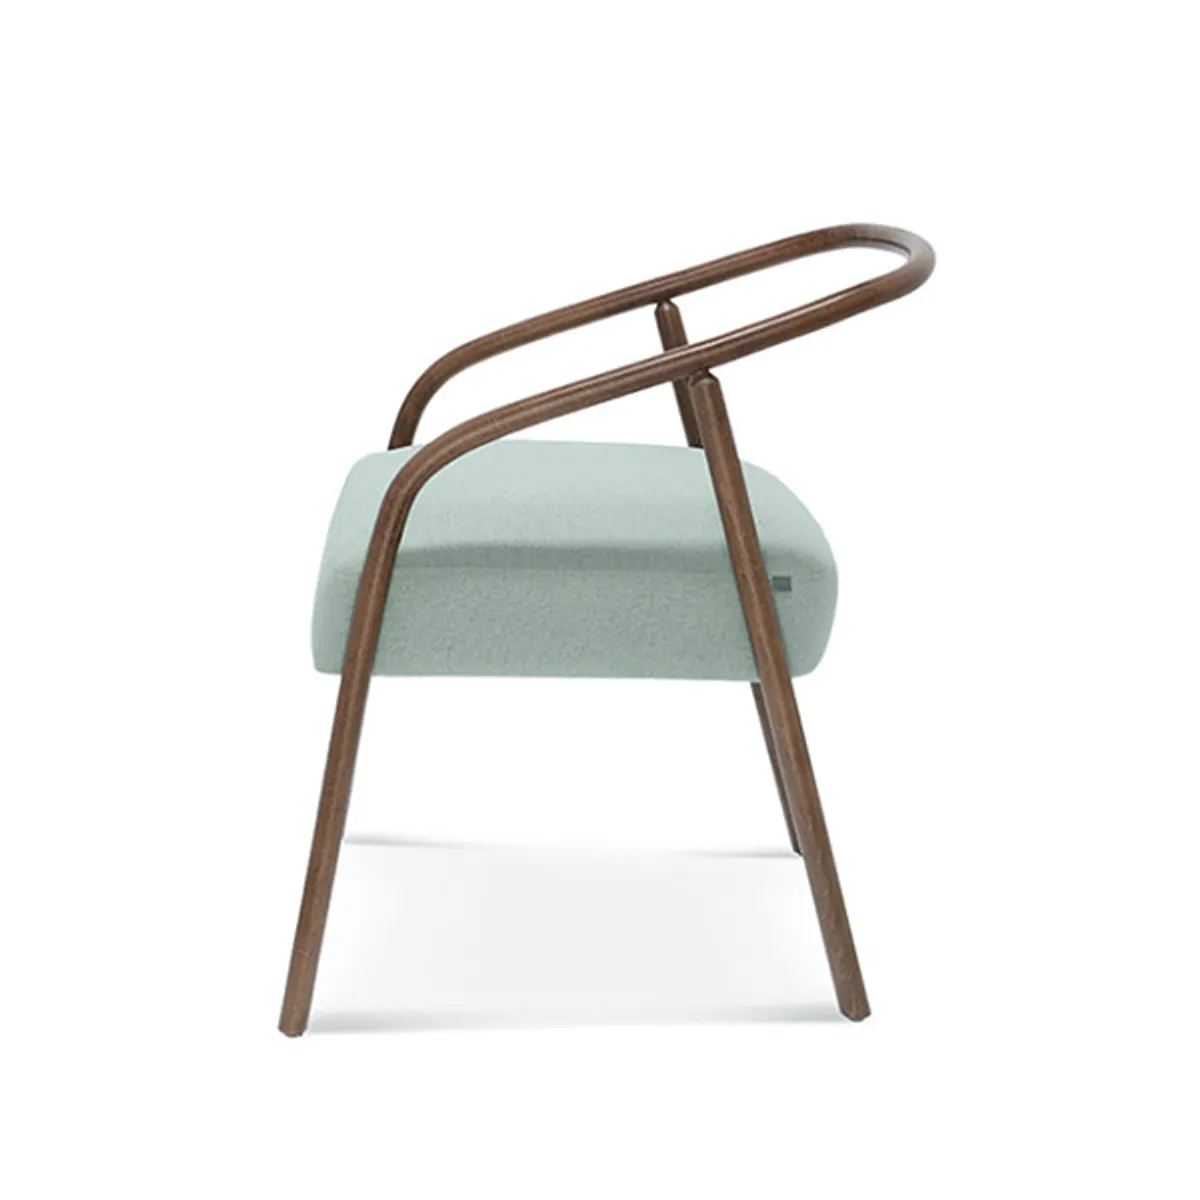 Nectar Armchair 2 Contemporary Bentwood Furniture Insideoutcontracts 022